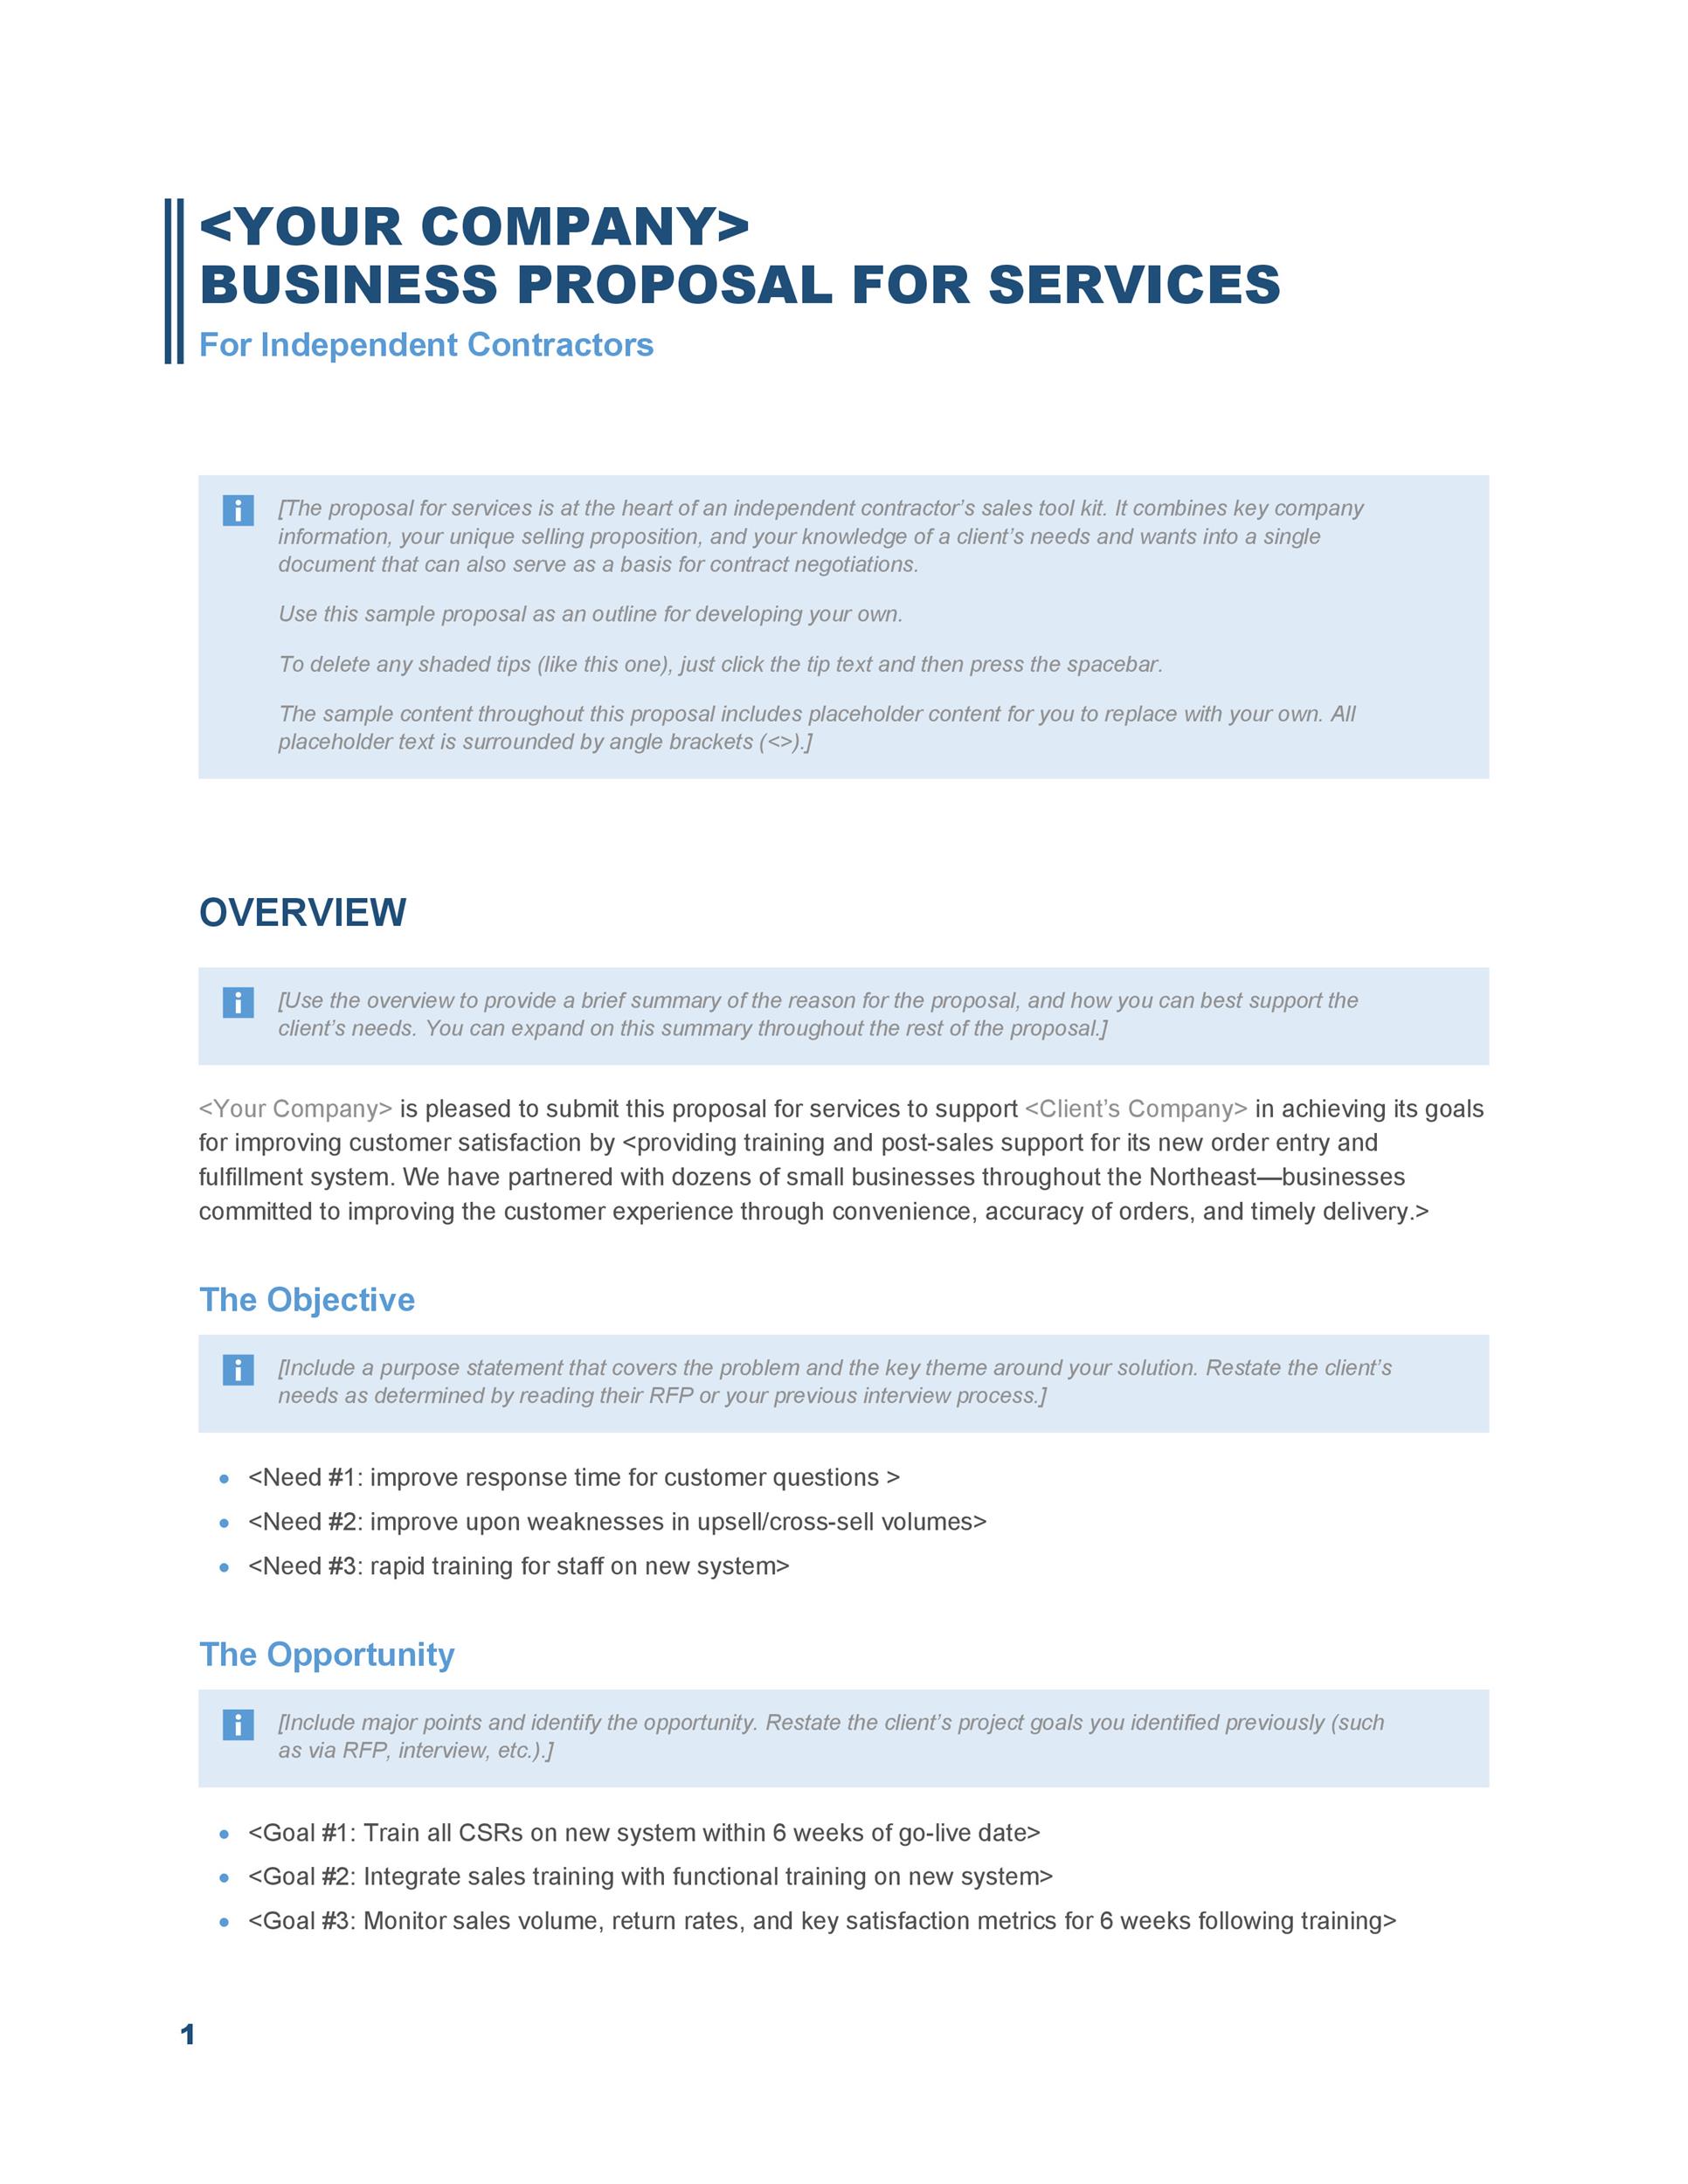 30 Business Proposal Templates And Proposal Letter Samples